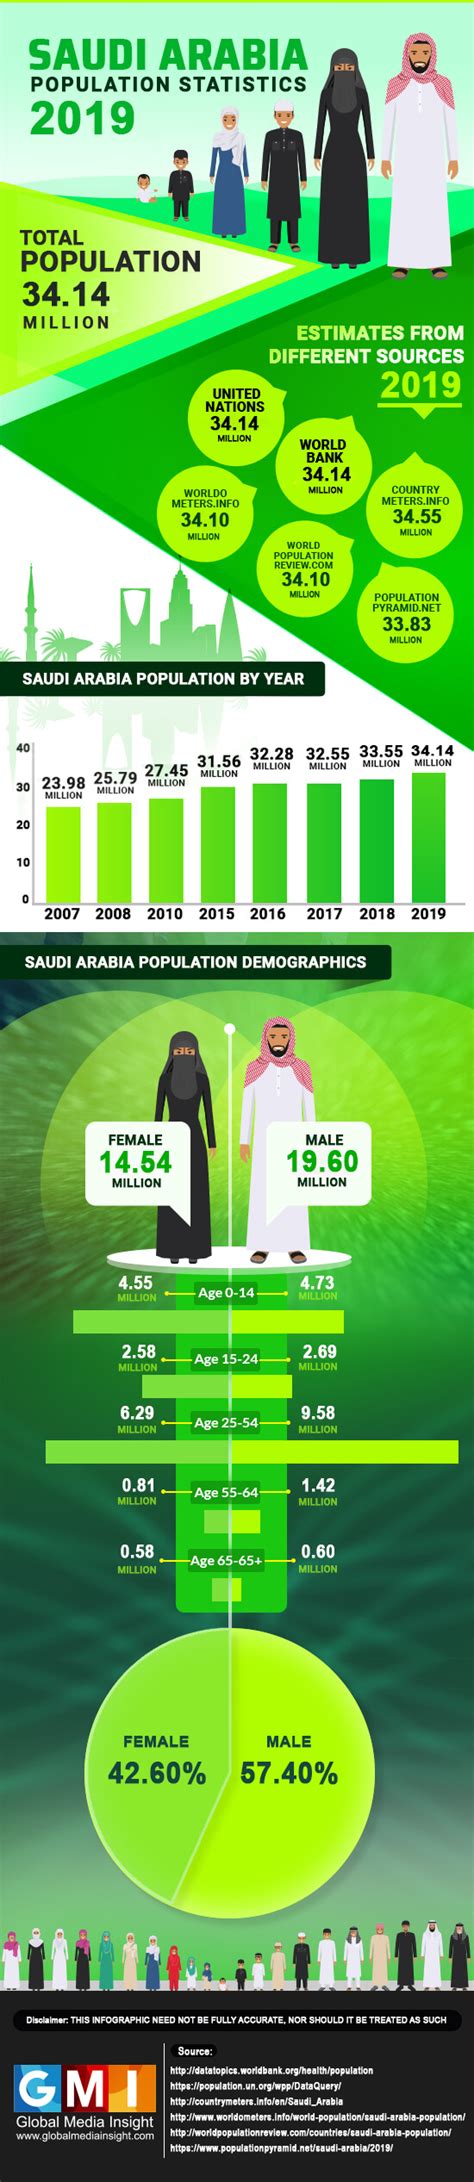 Economic Development And Population Growth In Saudi Arabia By 2020 Infographic Visualistan